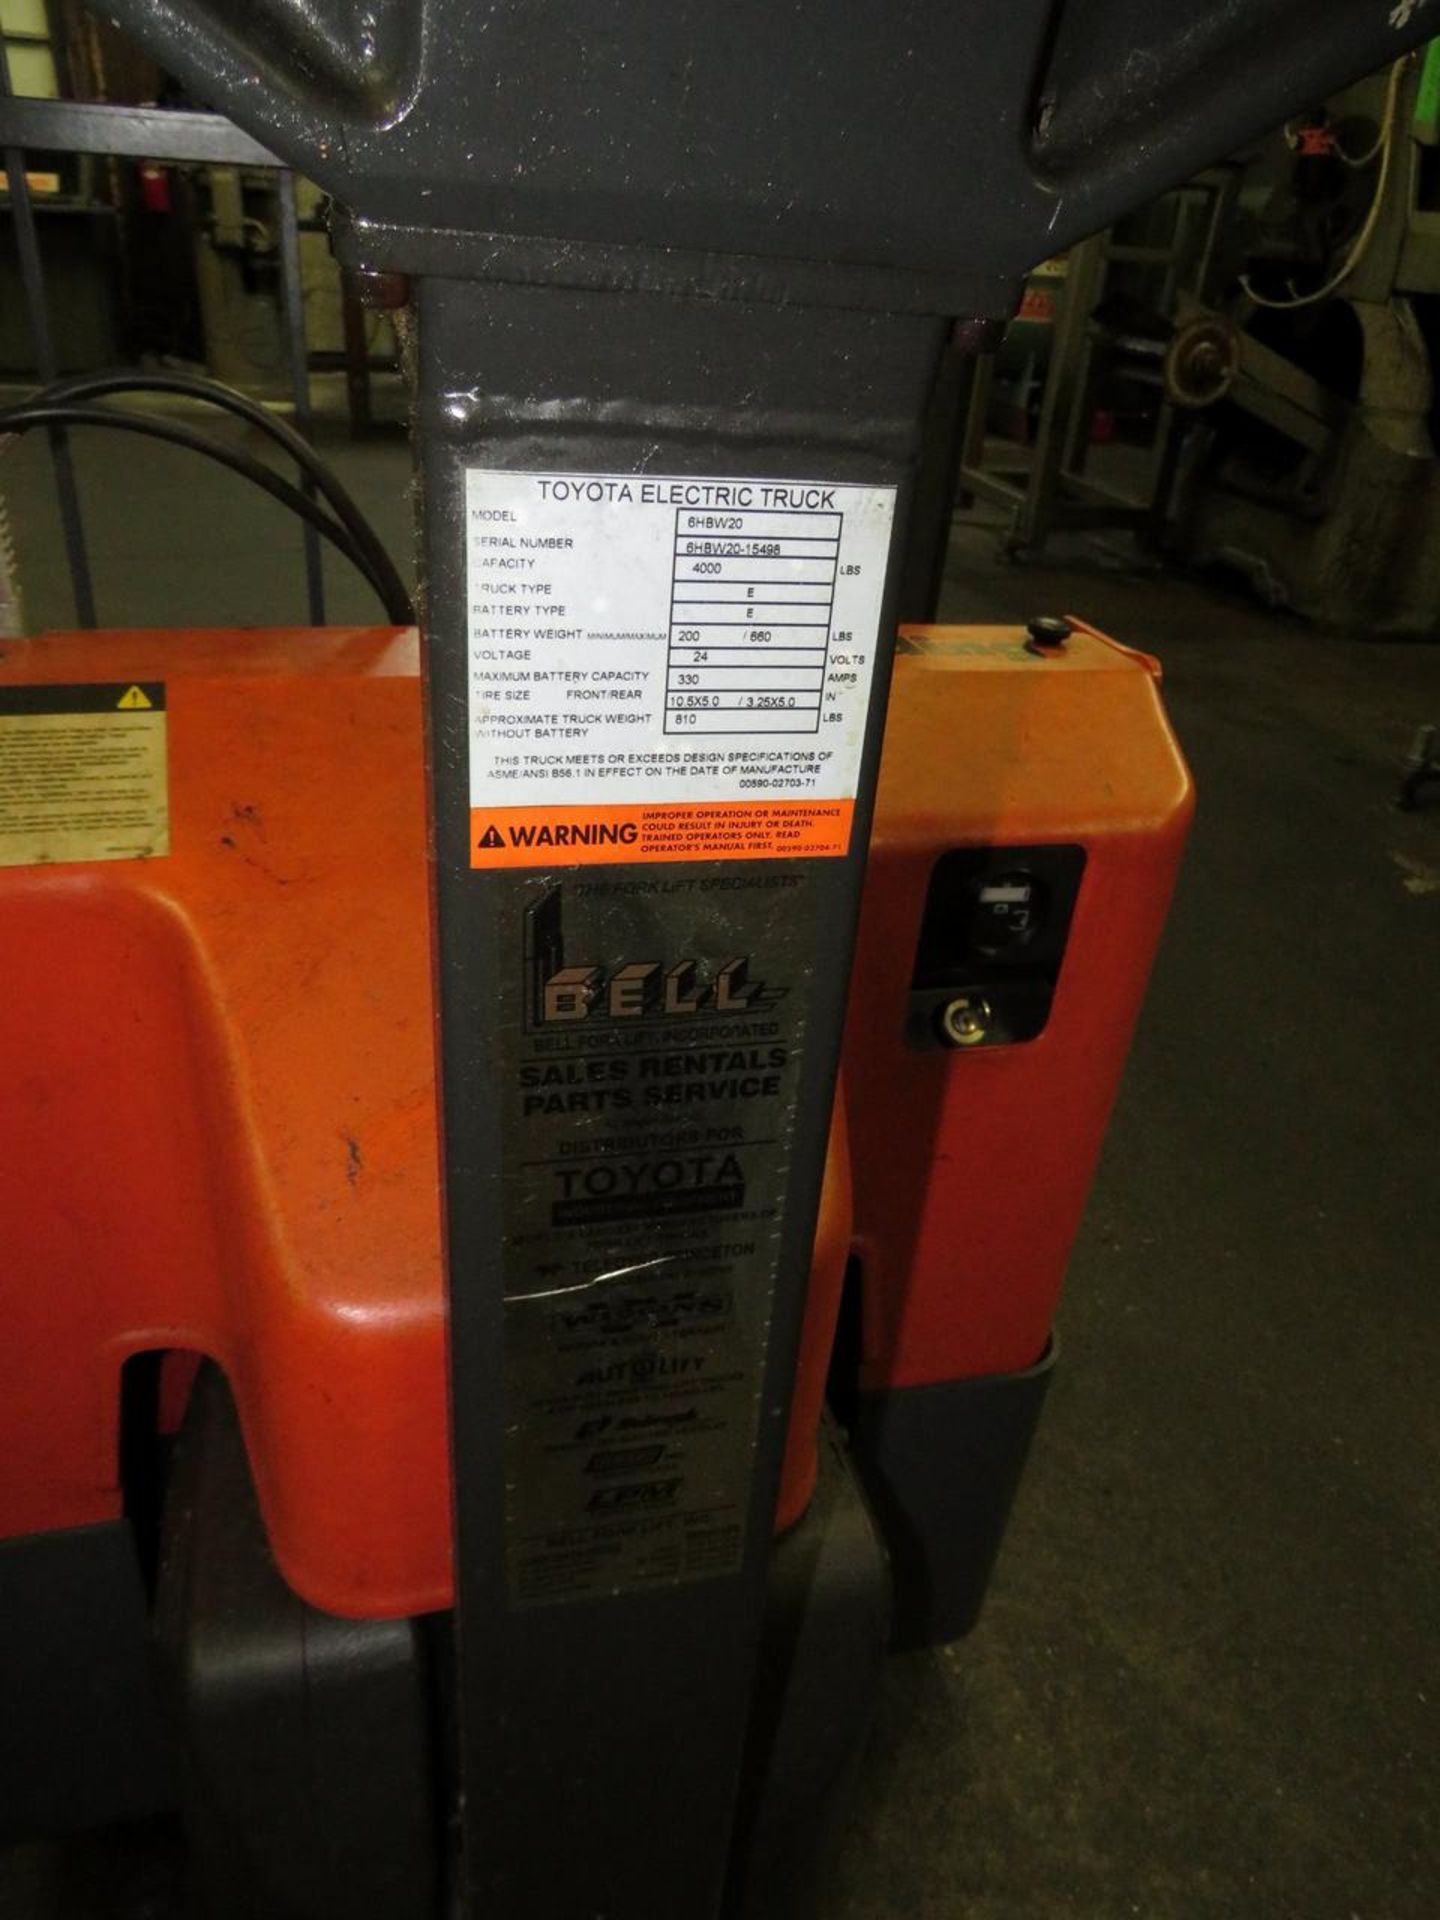 TOYOTA 6HBW20 4,000 LB. CAPACITY WALKIE ELECTRIC PALLET JACK - Image 3 of 8